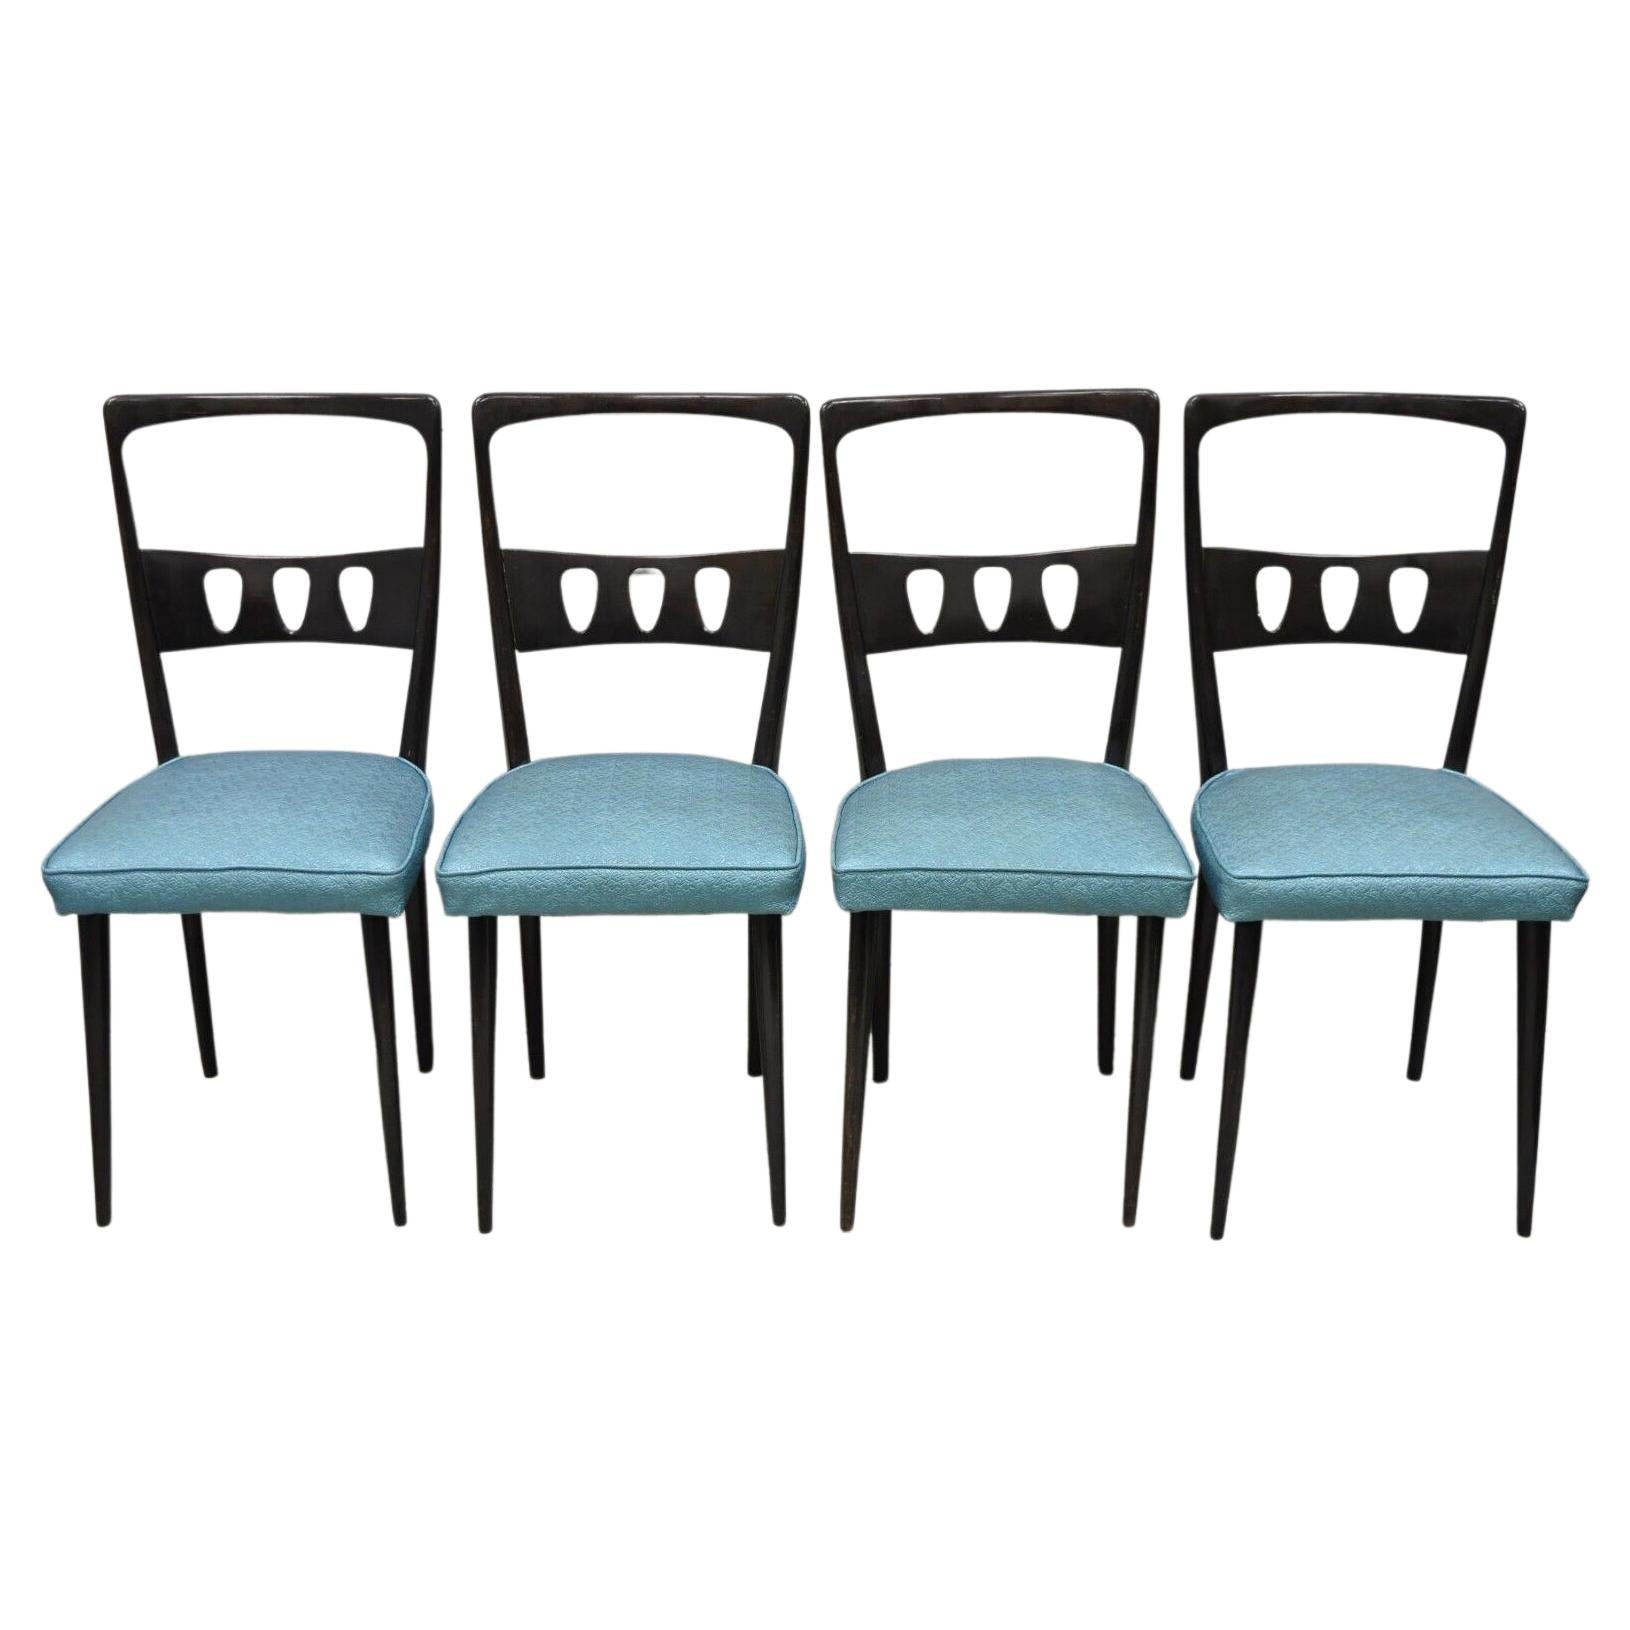 Vintage Italian Mid-Century Modern Ico Parisi Style Dining Chairs, Set of 4 For Sale